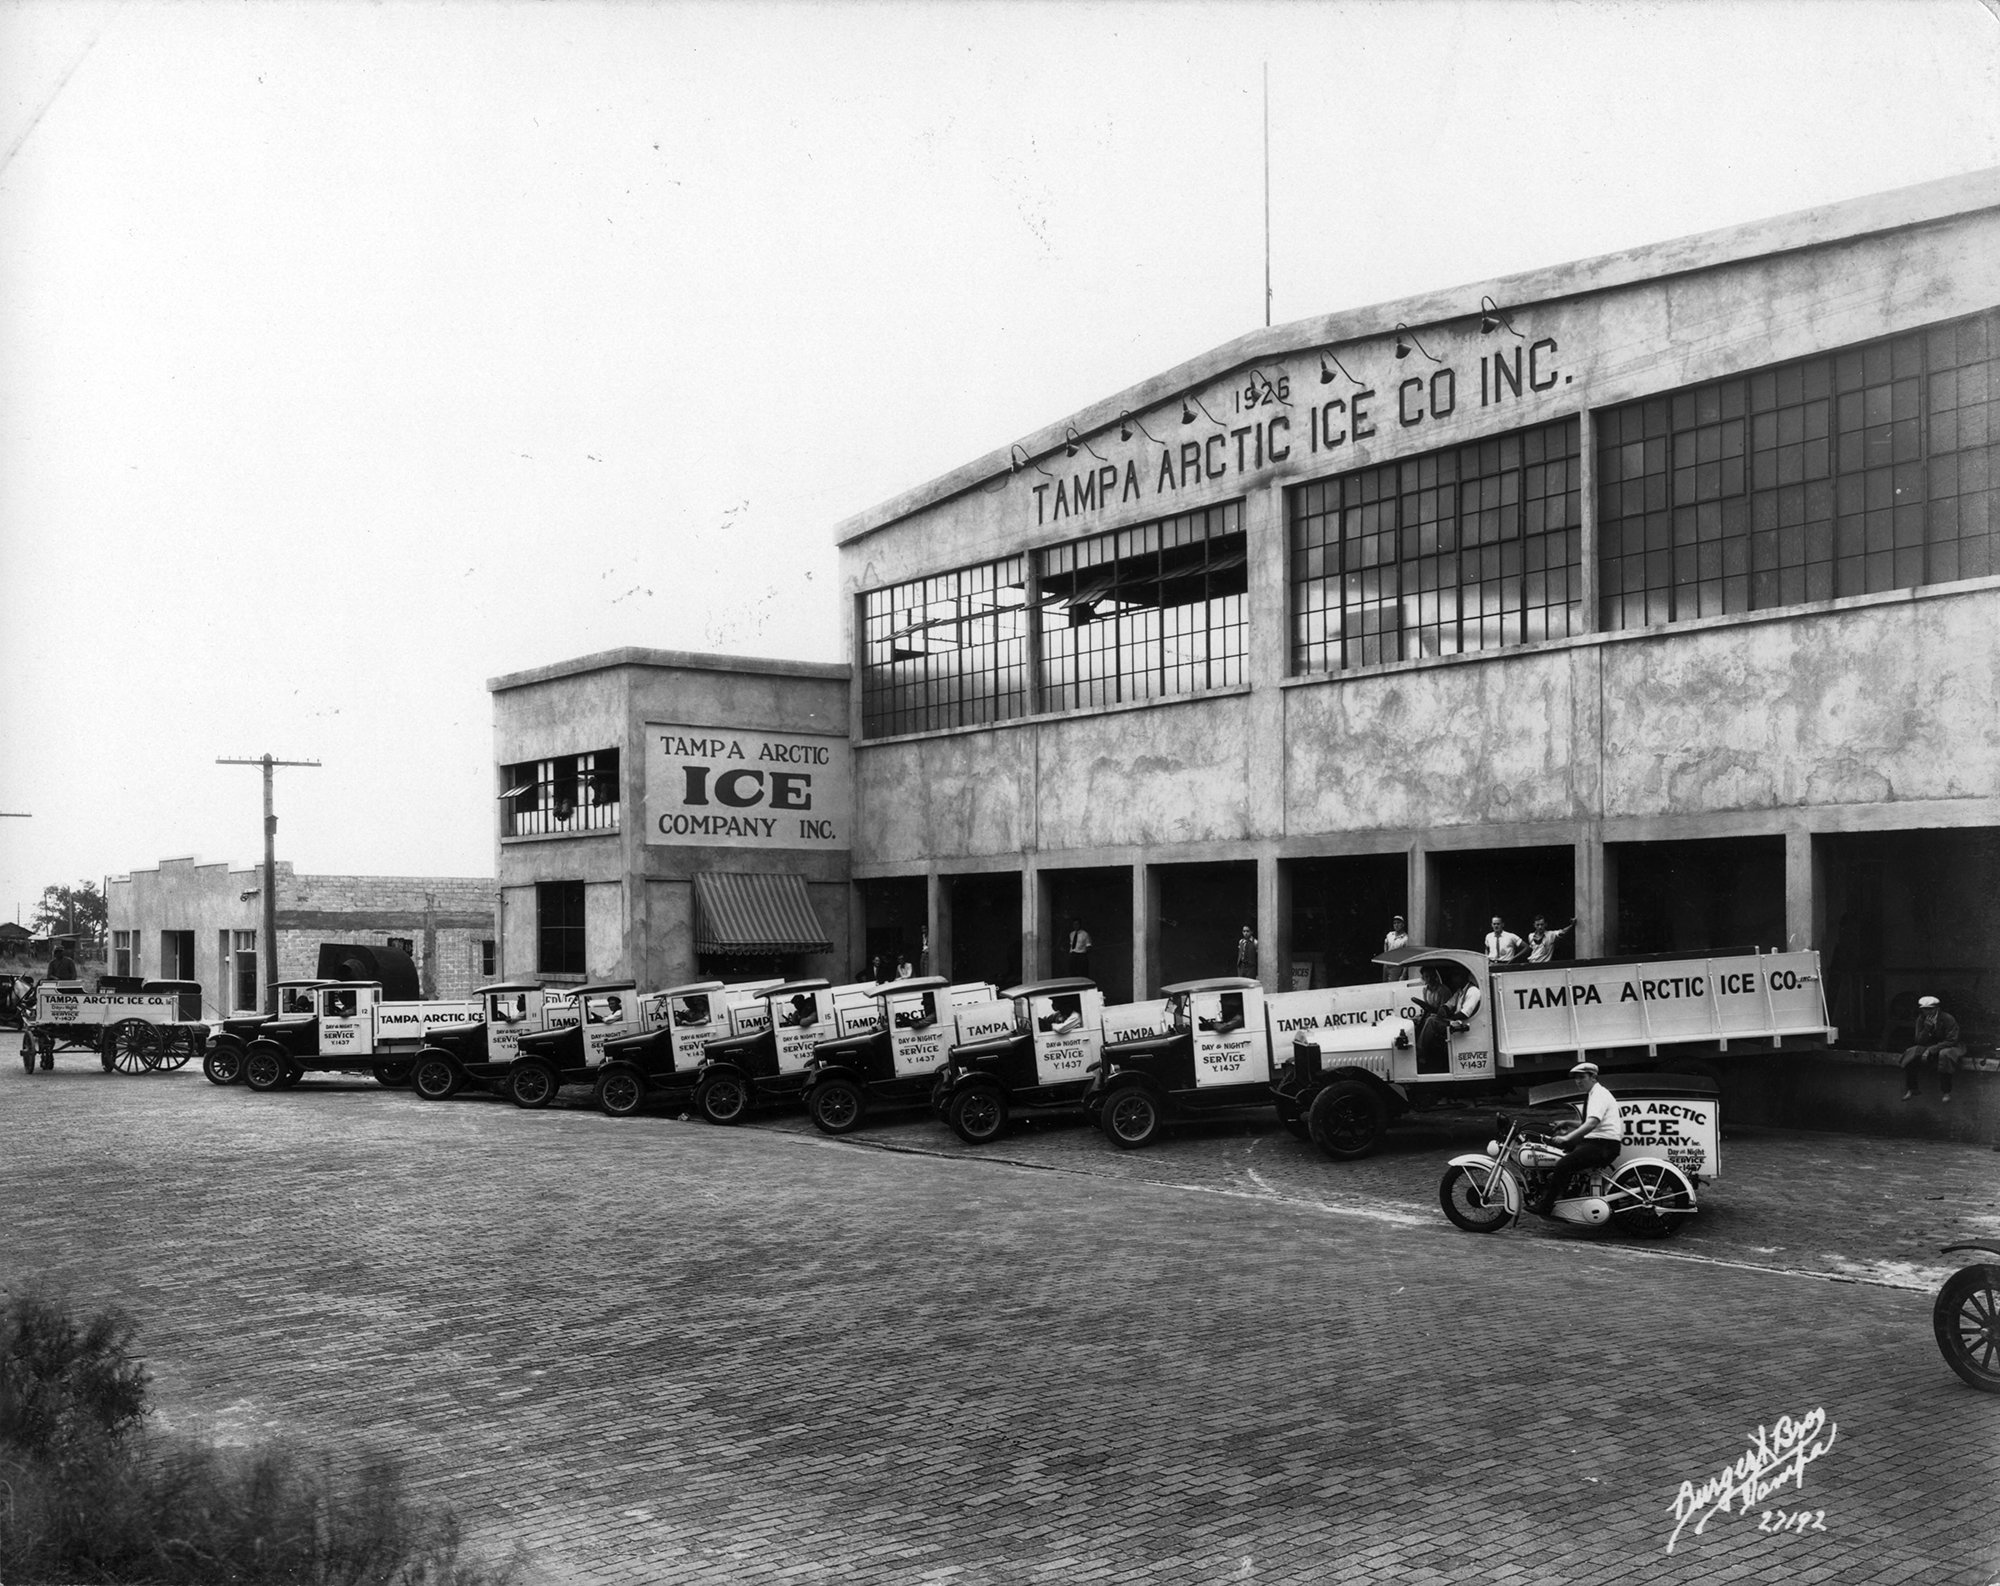 Delivery-Trucks-At-The-Tampa-Arctic-Ice-Company-Inc.-1402-2nd-Ave-rev-1.jpg